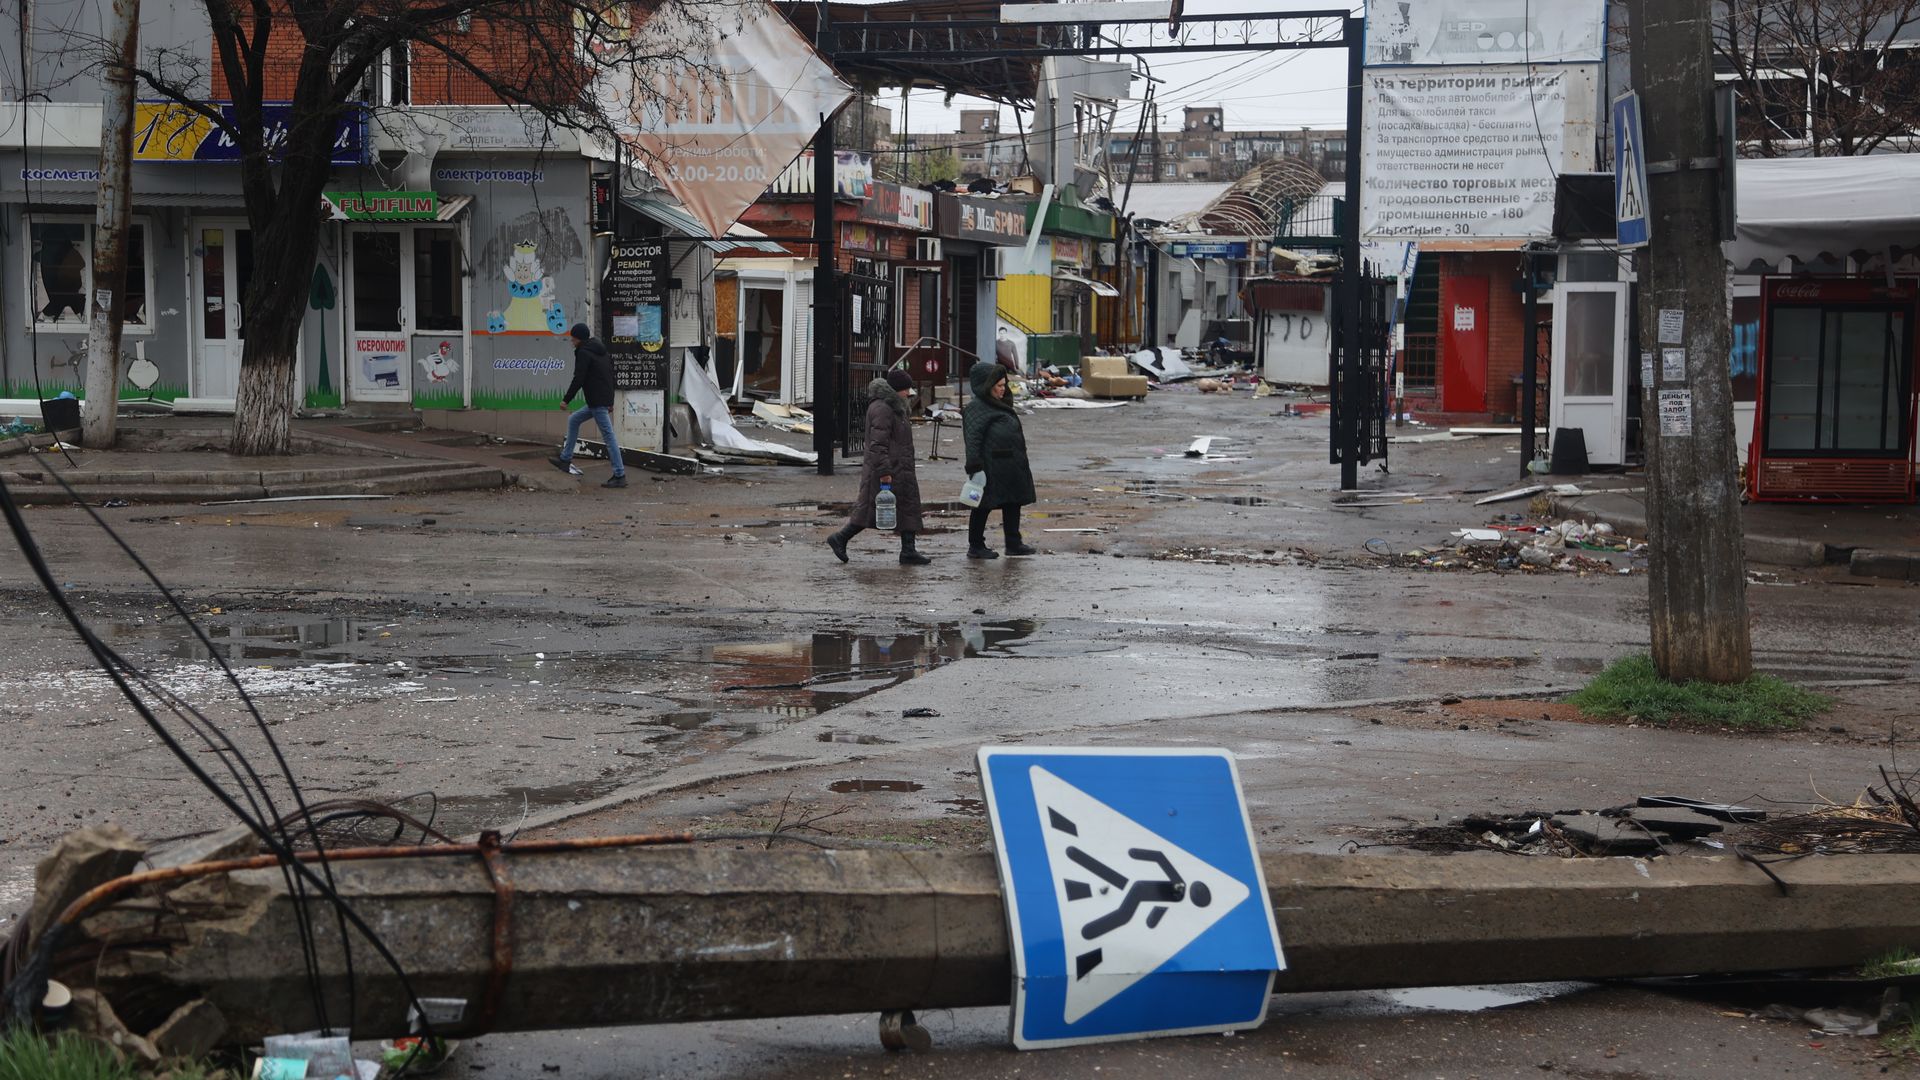 A view of damage in the street in the Ukrainian city of Mariupol under the control of Russian military and pro-Russian separatists, on April 13, 2022.